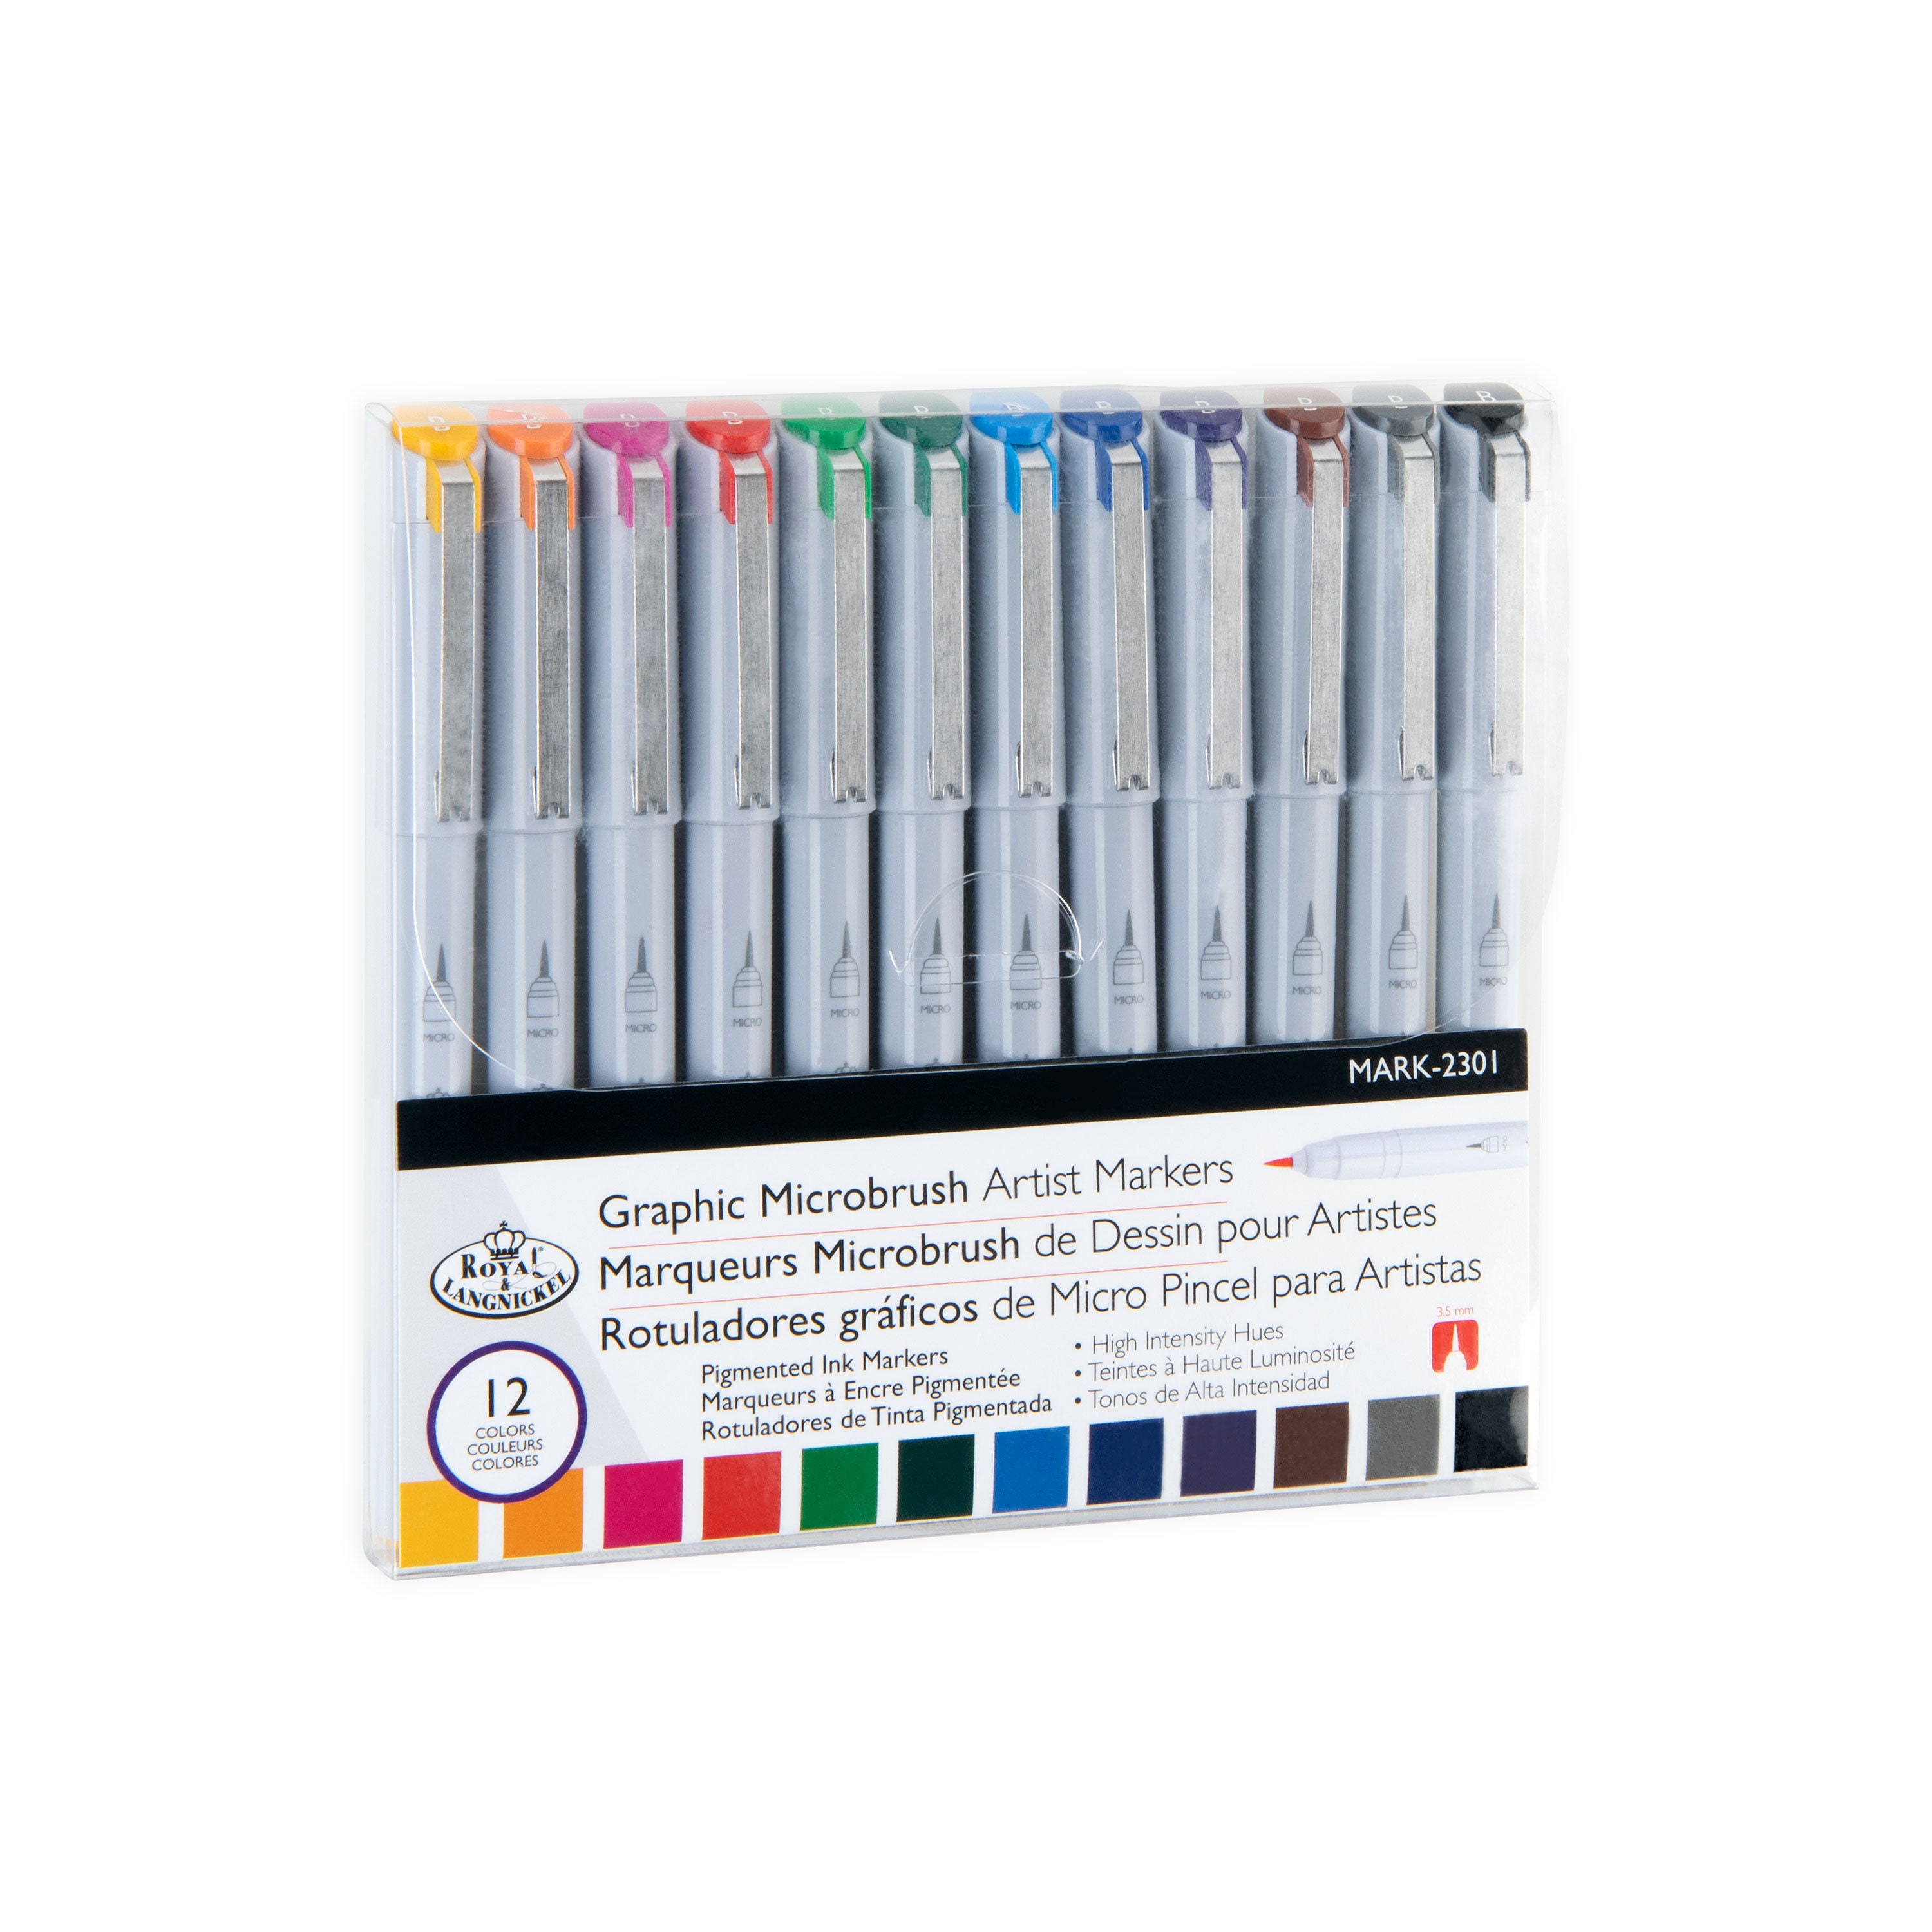 Art Marker Sets Alcohol Based Permanent Markers for Sketching, Drawing,  Pencil Coloring, Beginners or Pros, Kids or Adults 